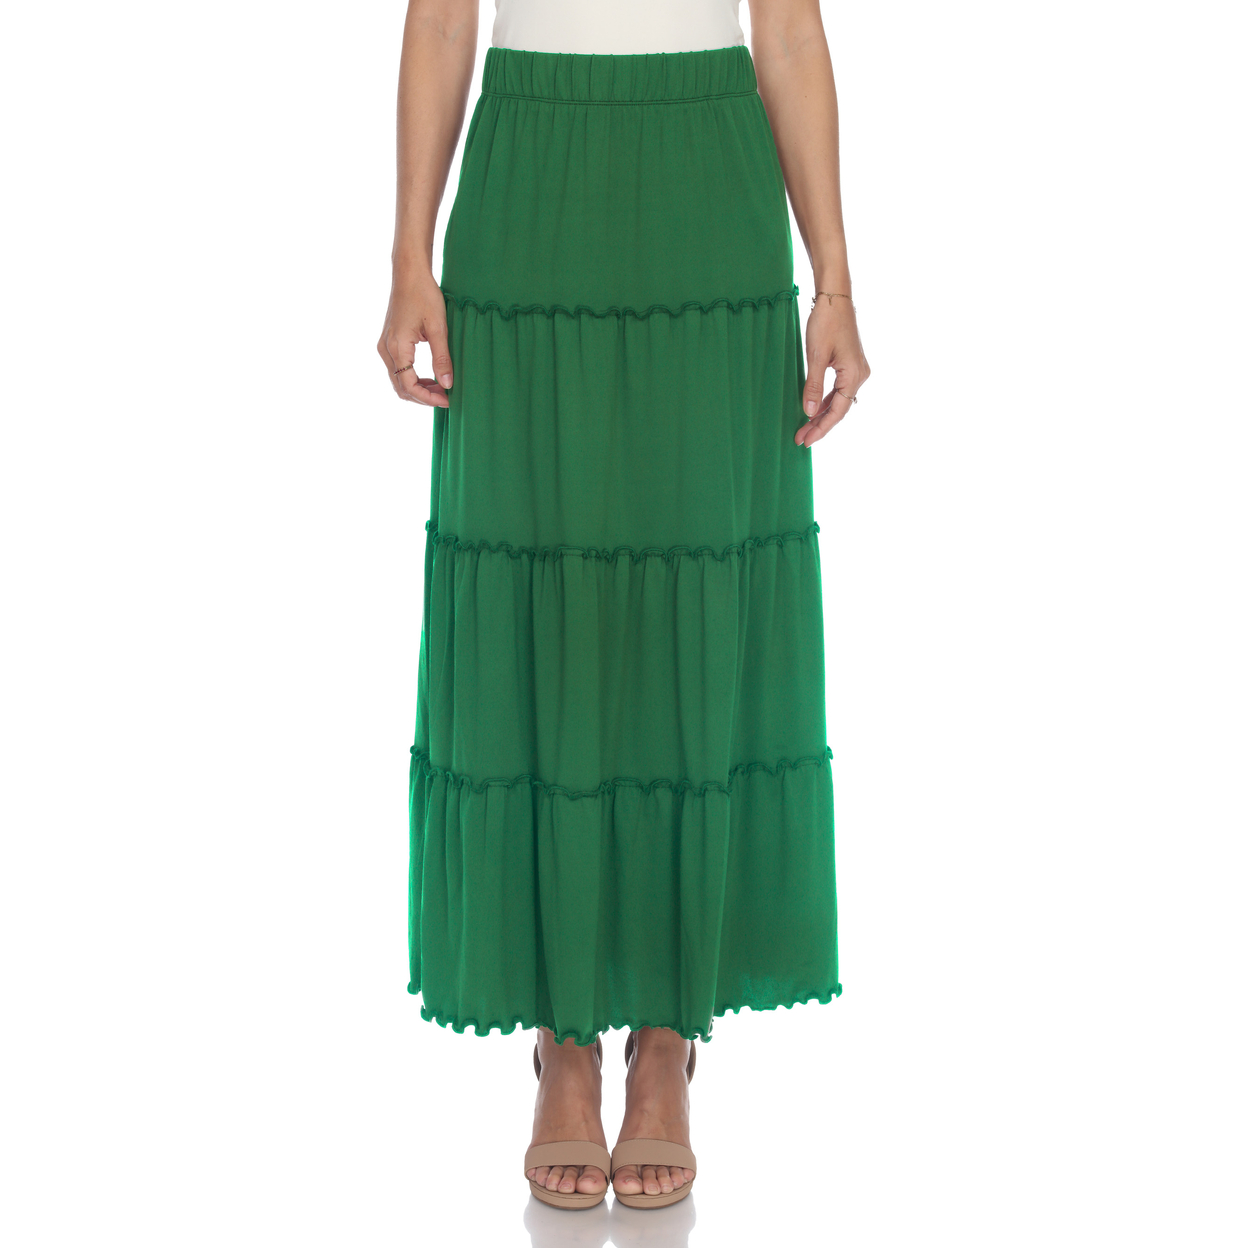 White Mark Women's Tiered Maxi Skirt With Pockets - Green, Large